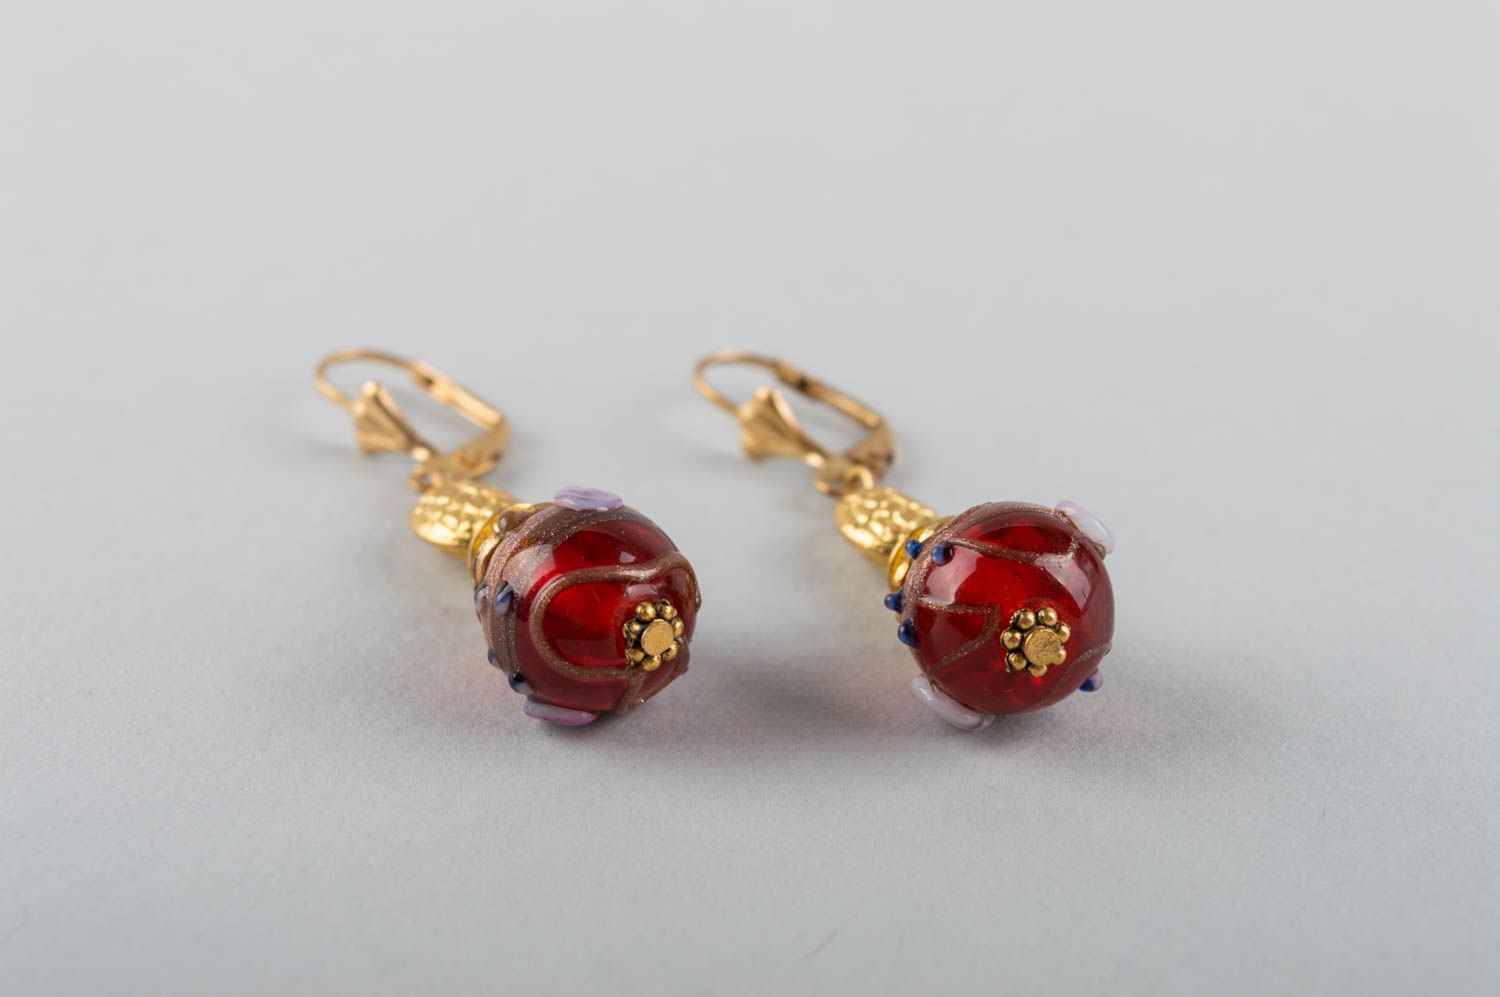 Handmade luxurious dangling earrings with golden colored basis and mural glass photo 3